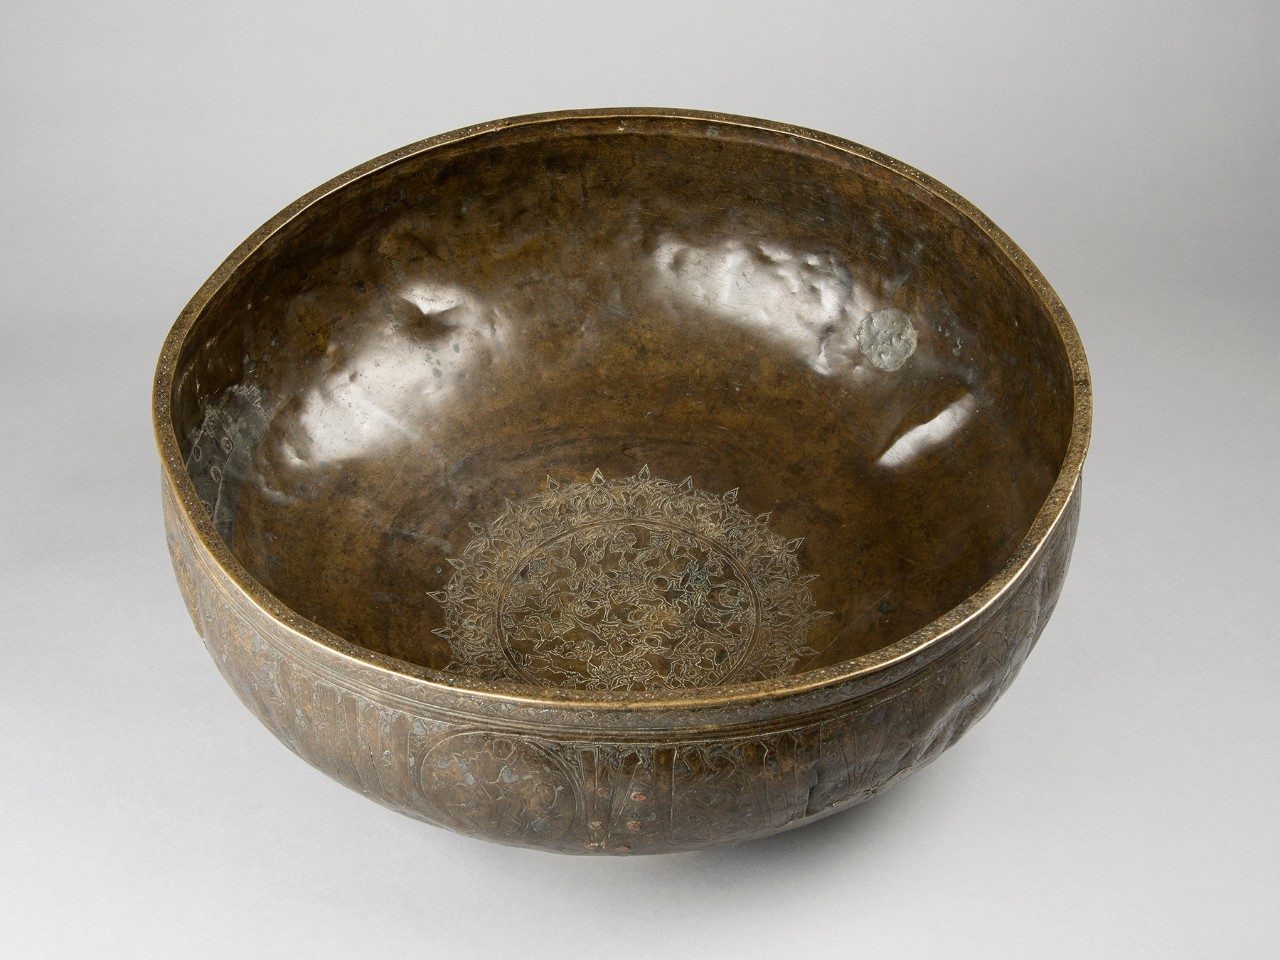 Brass bowl with a fish and pond pattern carved at the bottom of the object’s interior.  Additional inscriptions are visible around the bowl’s exterior. 